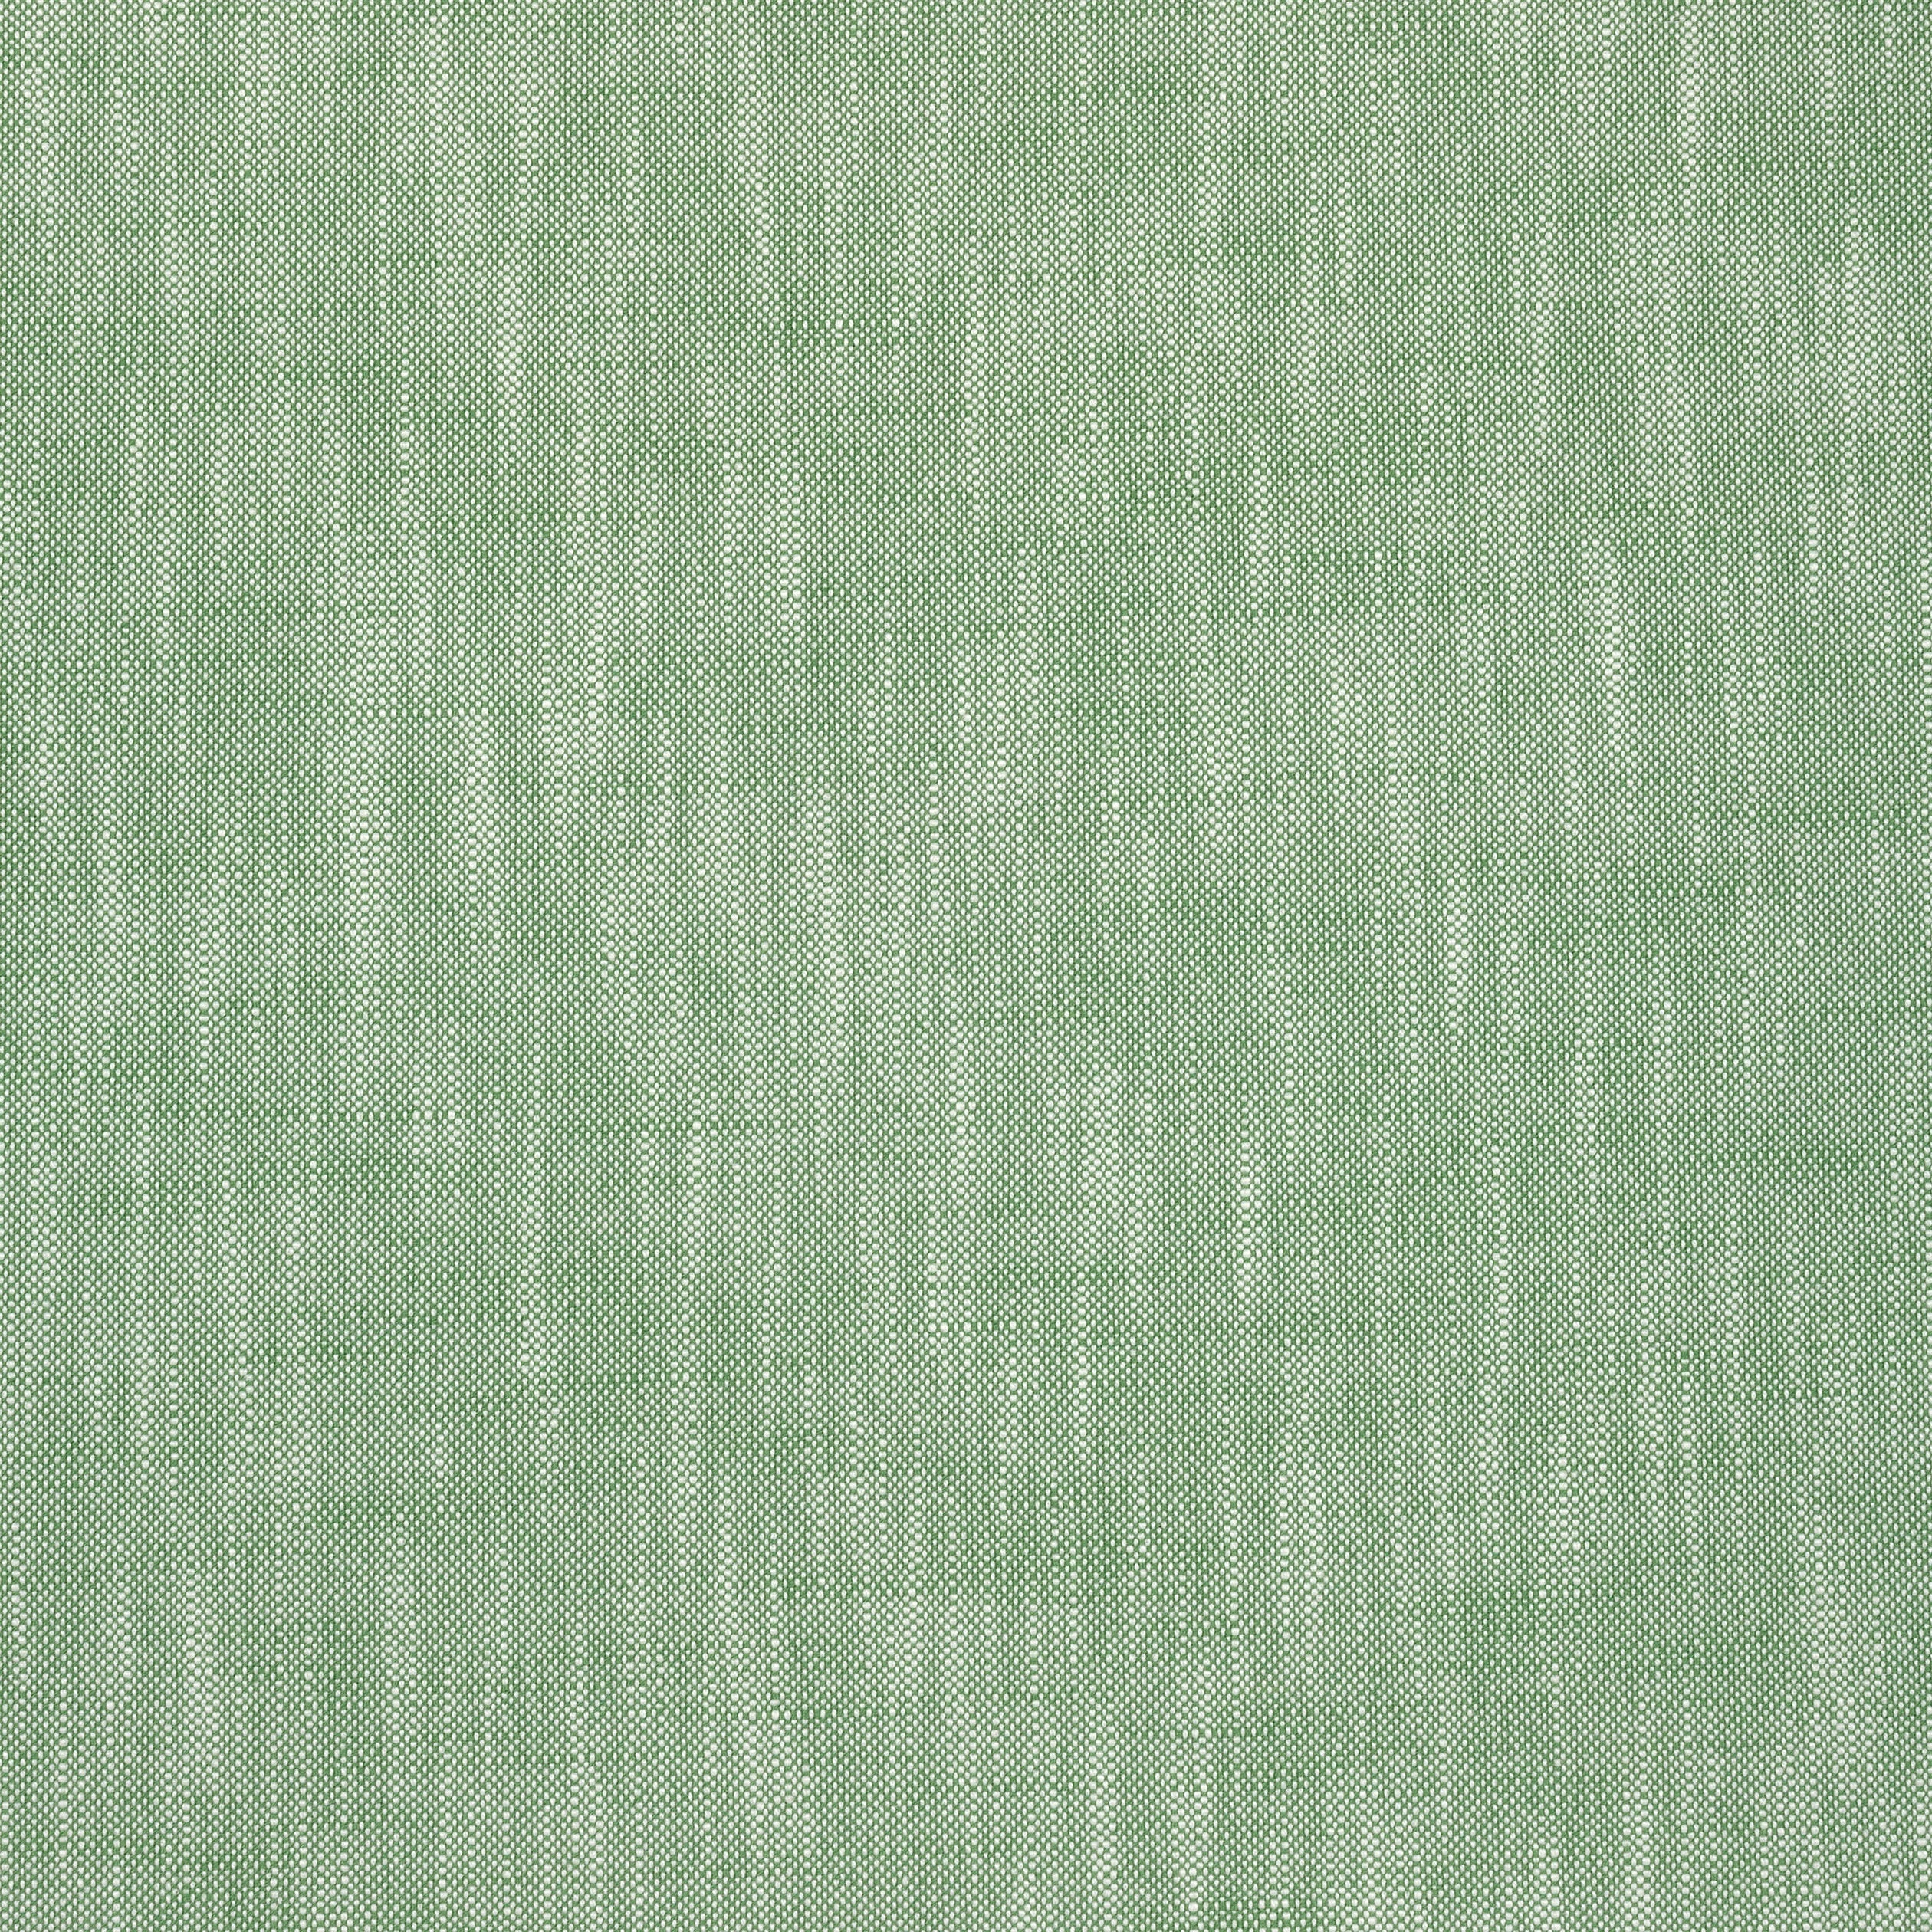 Bristol fabric in kelly green color - pattern number W73411 - by Thibaut in the Landmark Textures collection